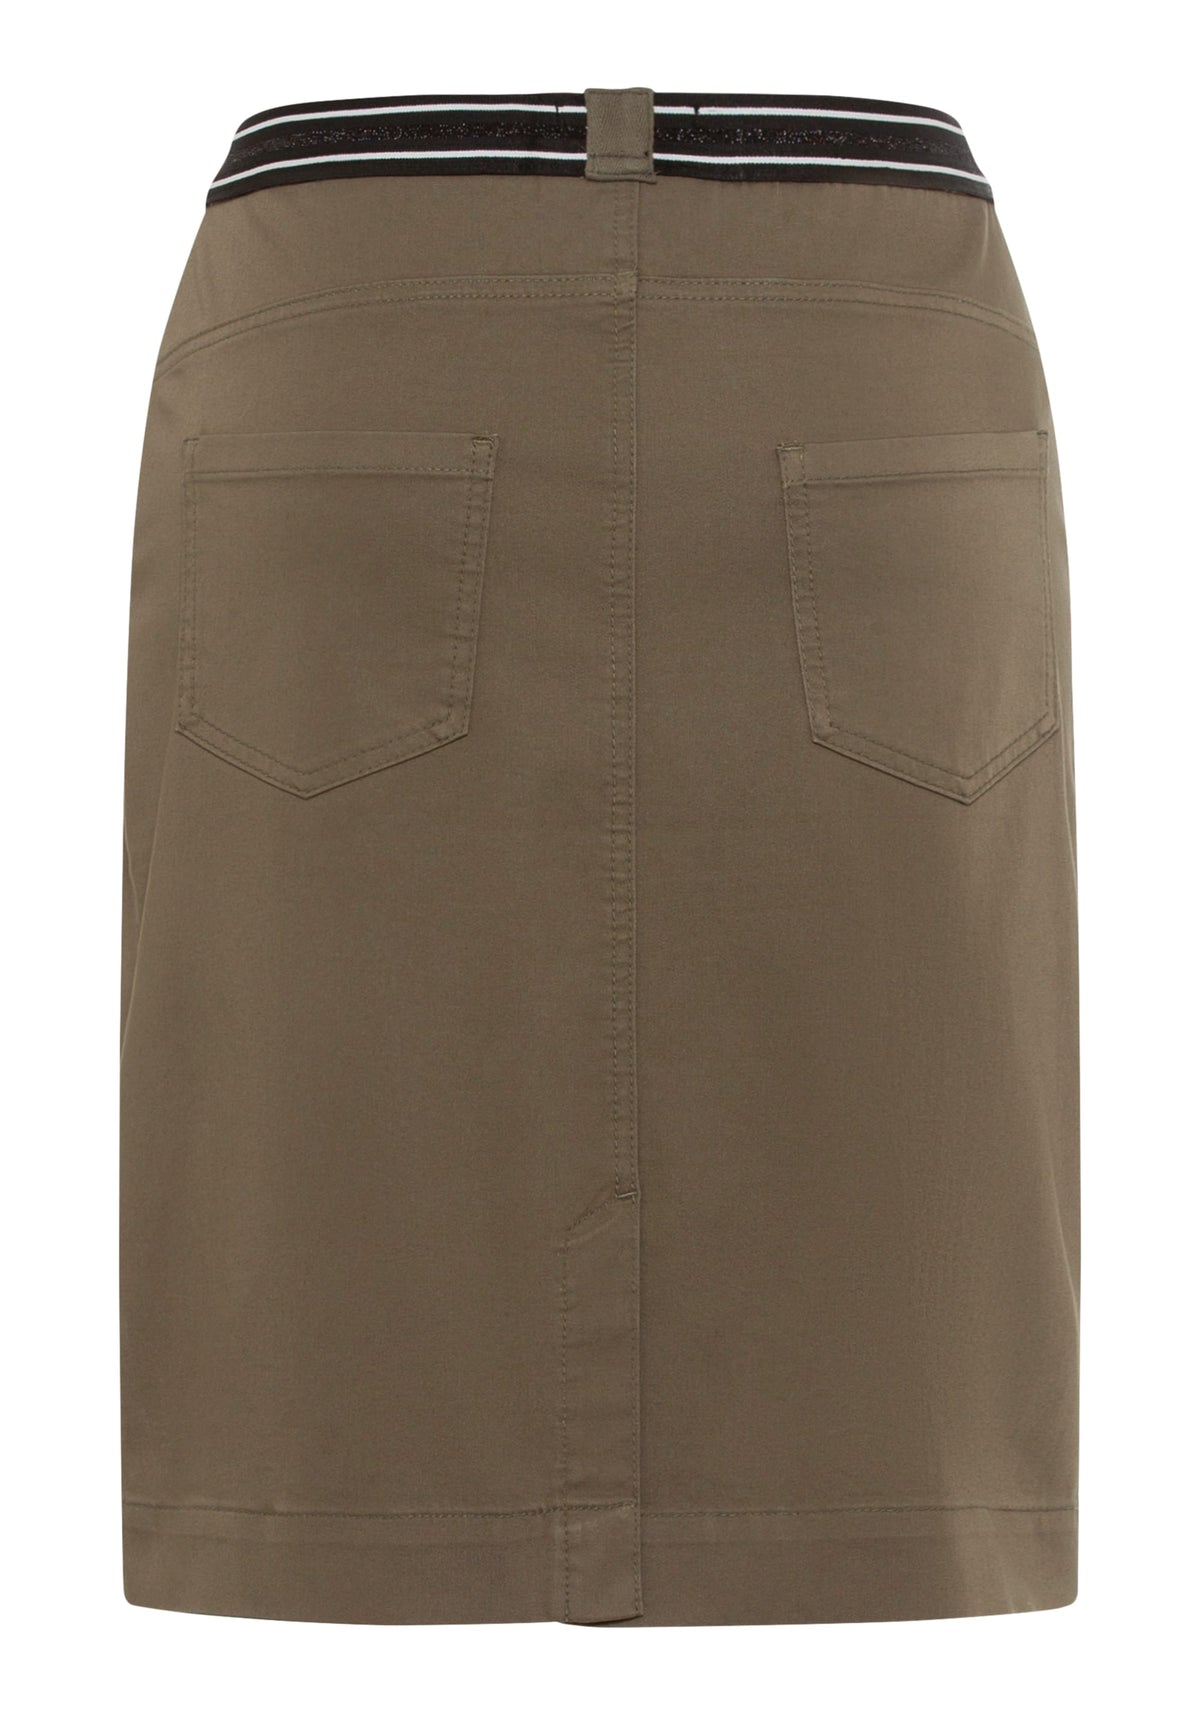 Cotton Blend Power Stretch Twill Pull-On Skirt